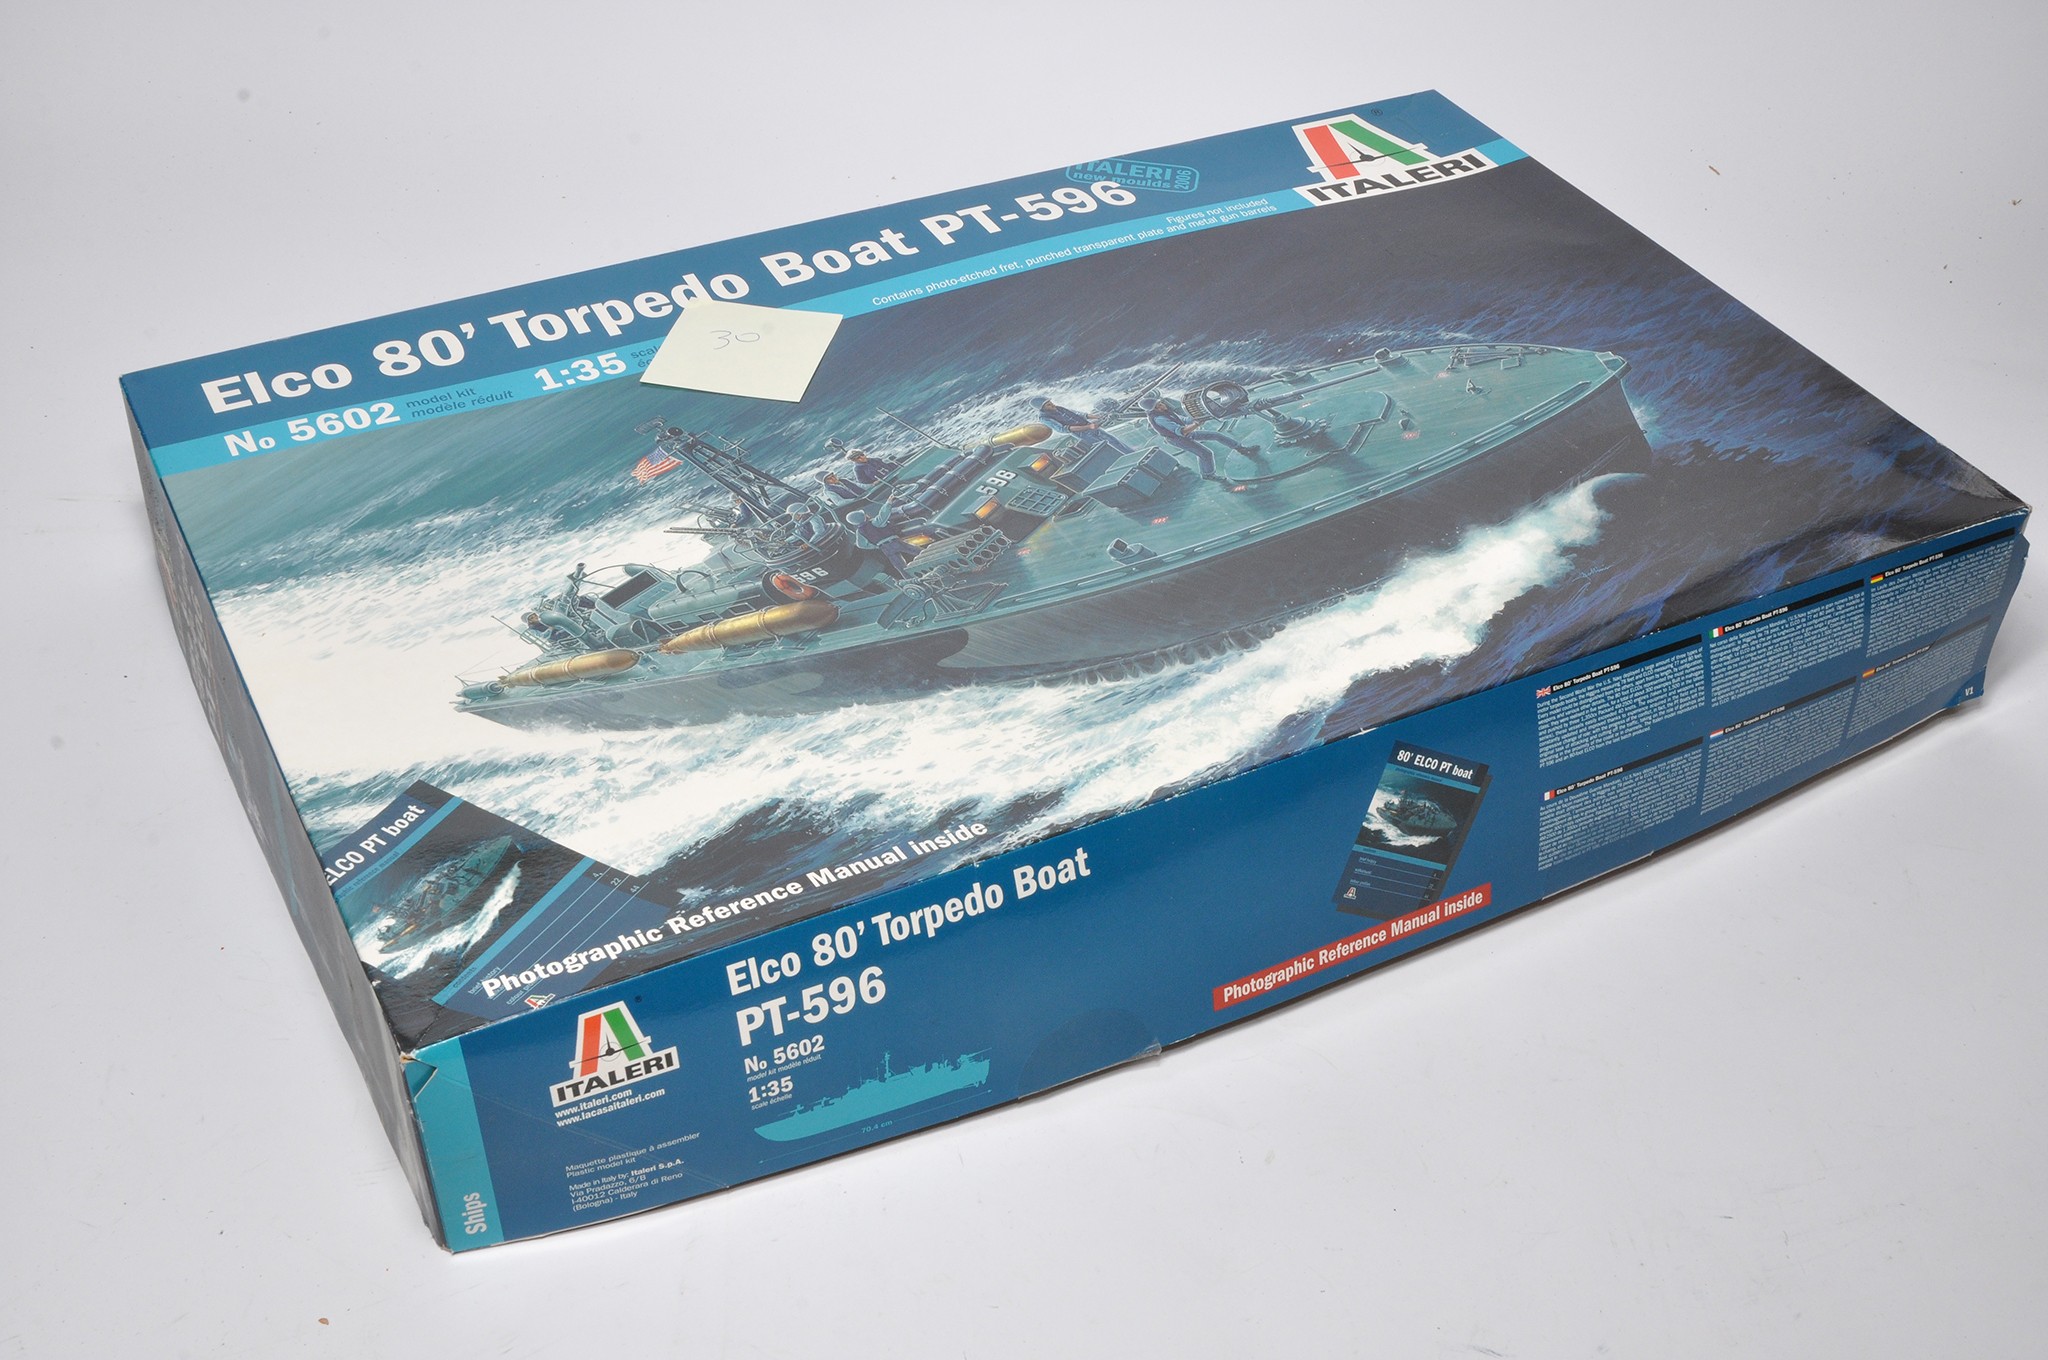 Italeri 1/35 Plastic model Kit no.5602 Elco 80' Torpedo Boat PT-596 with photographic reference